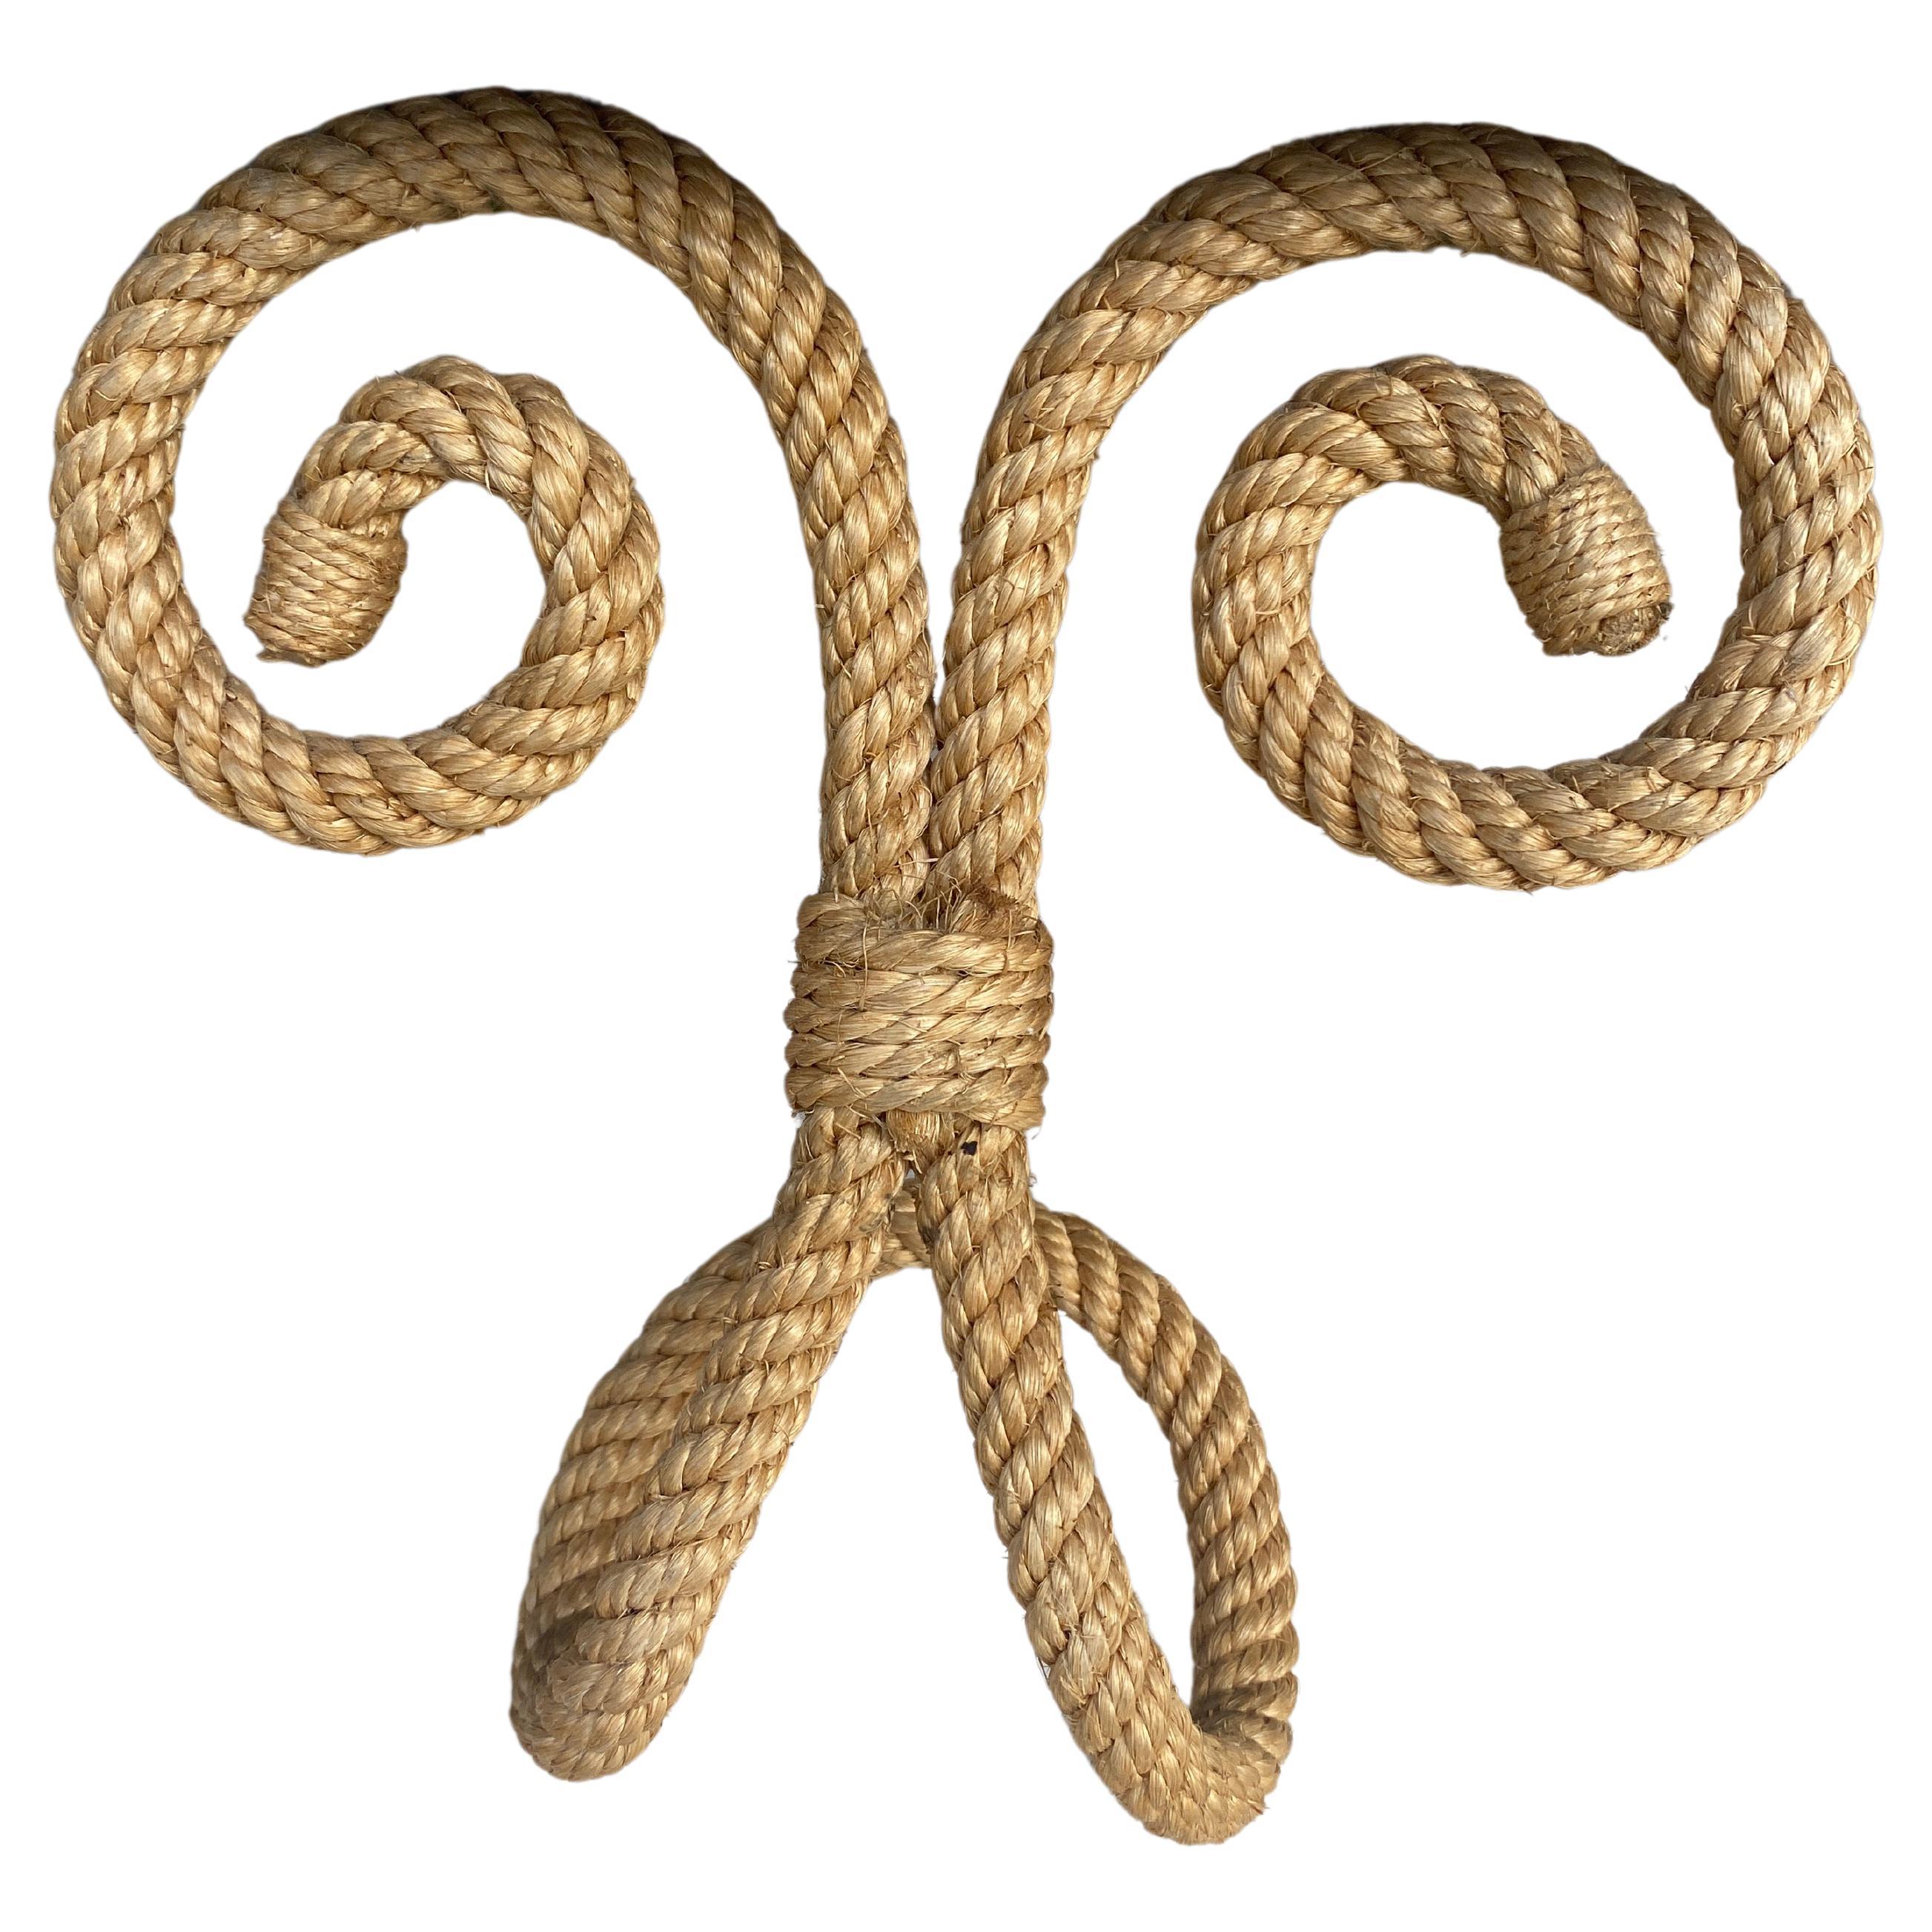 French rope hook coat Audoux Minet, circa 1960.
Measures: Height 8 inches , length 8 inches.